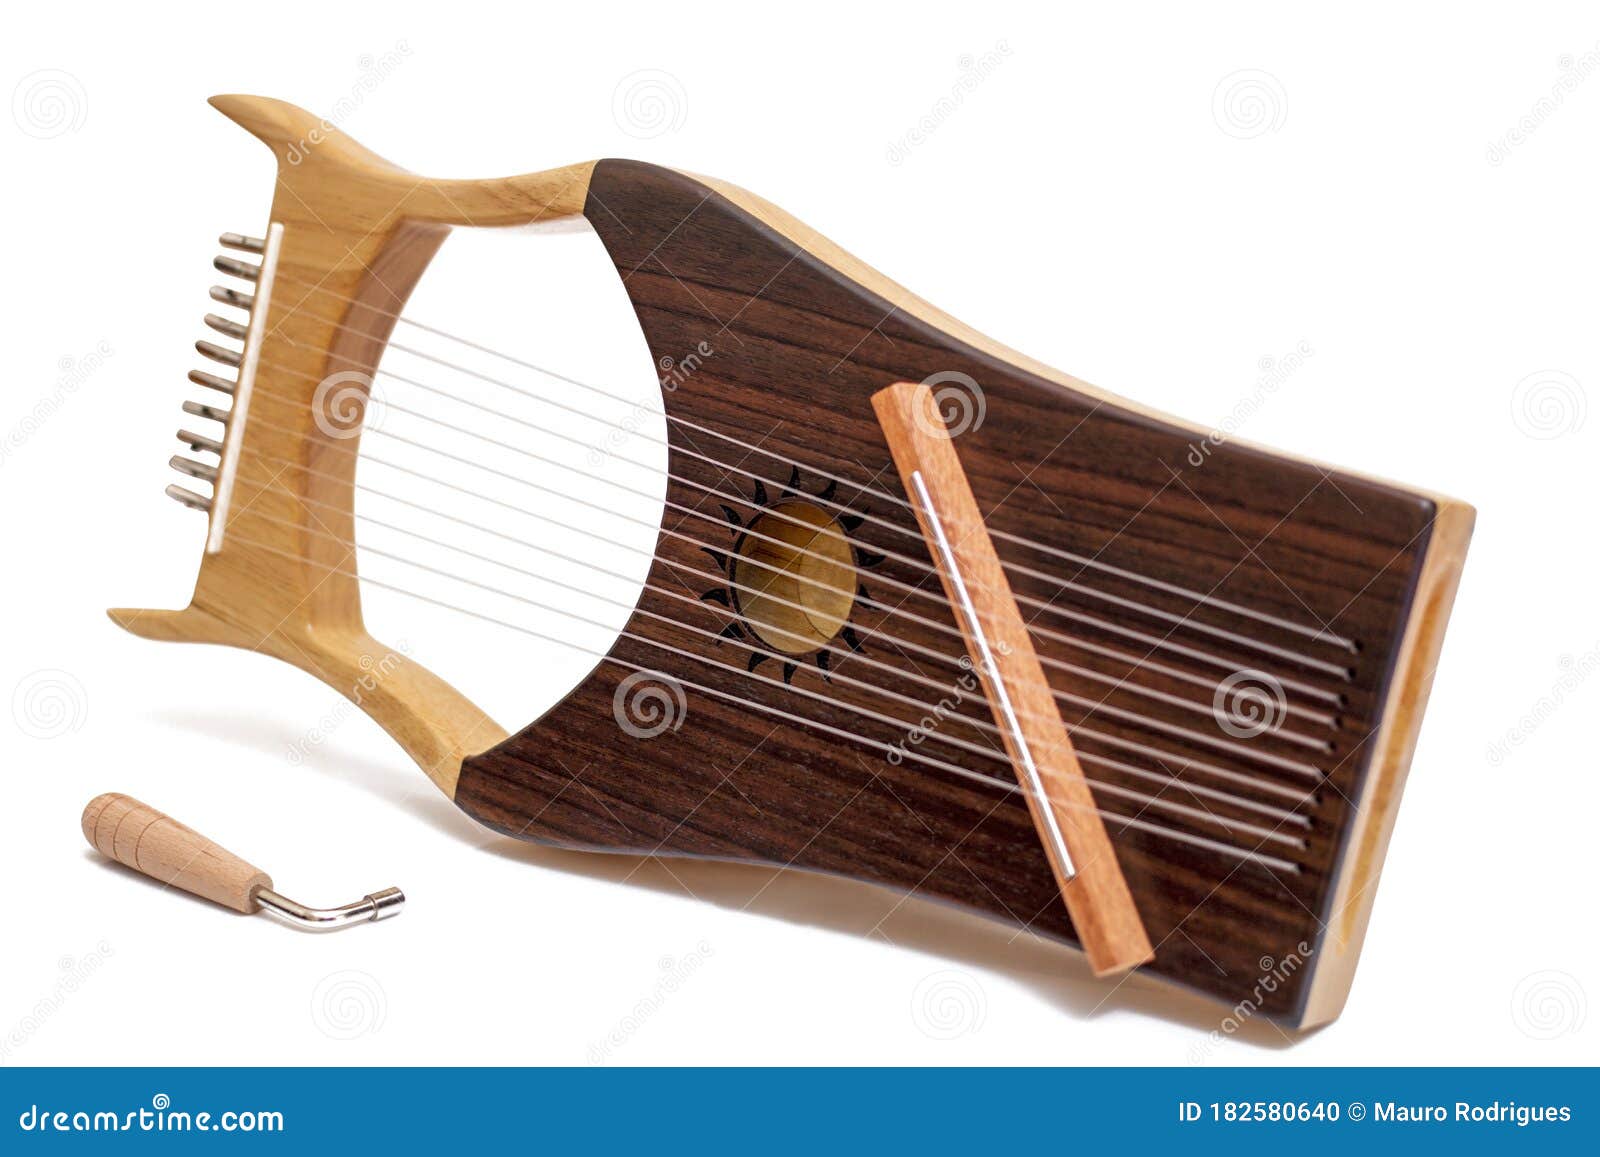 Stringed Lyre Musical Instrument Stock Photo - orchestral, 182580640